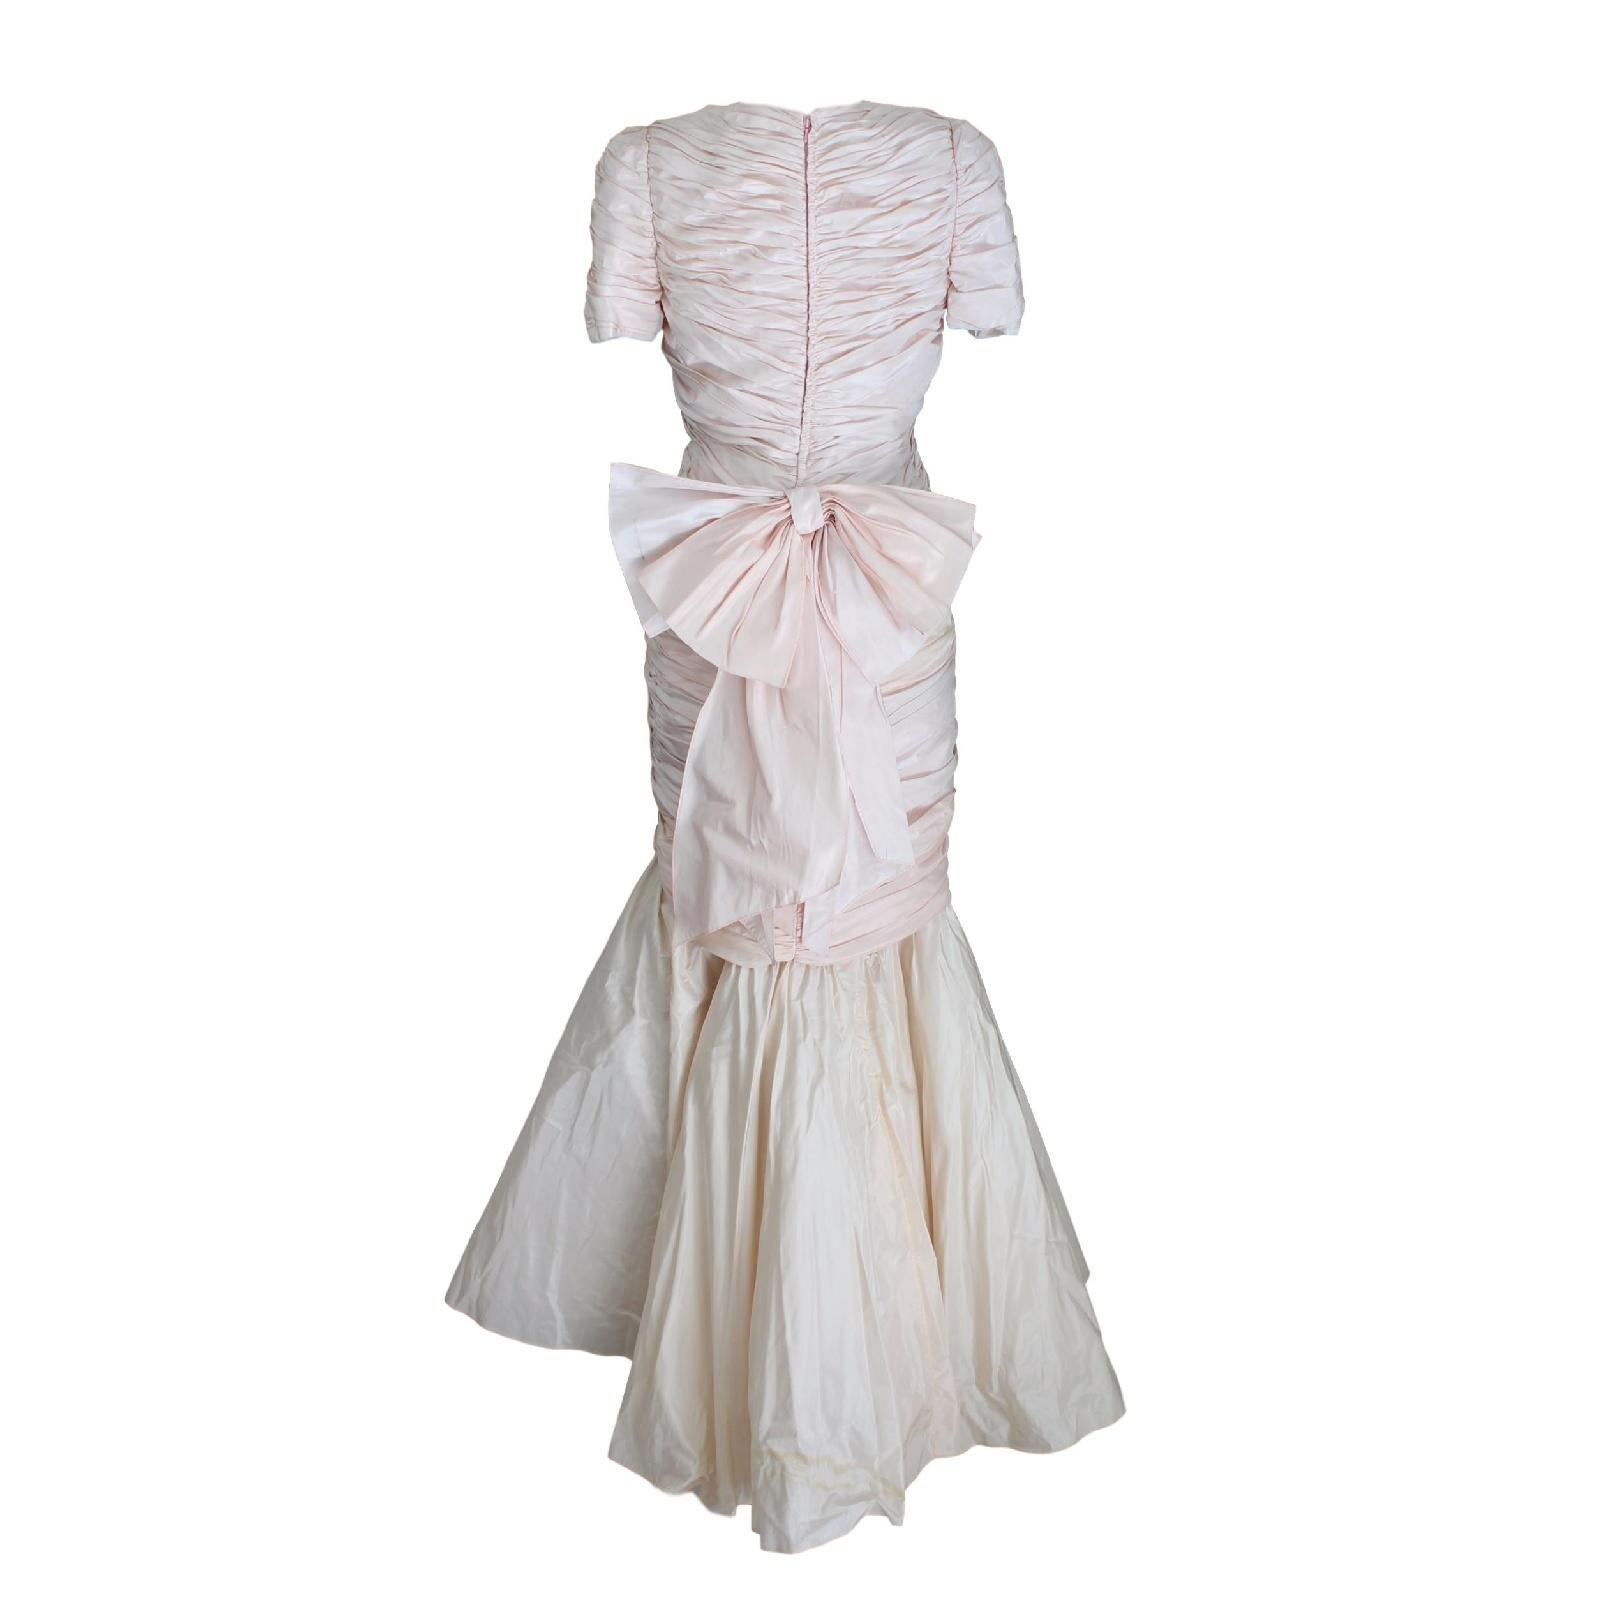 Vintage Cailan'd wedding dress from 1980. The dress consists of two pieces. You can wear it in two different ways as a sheath dress, or as a mermaid dress. The color is a refined antique rose, made of 100% silk. Excellent vintage condition. The